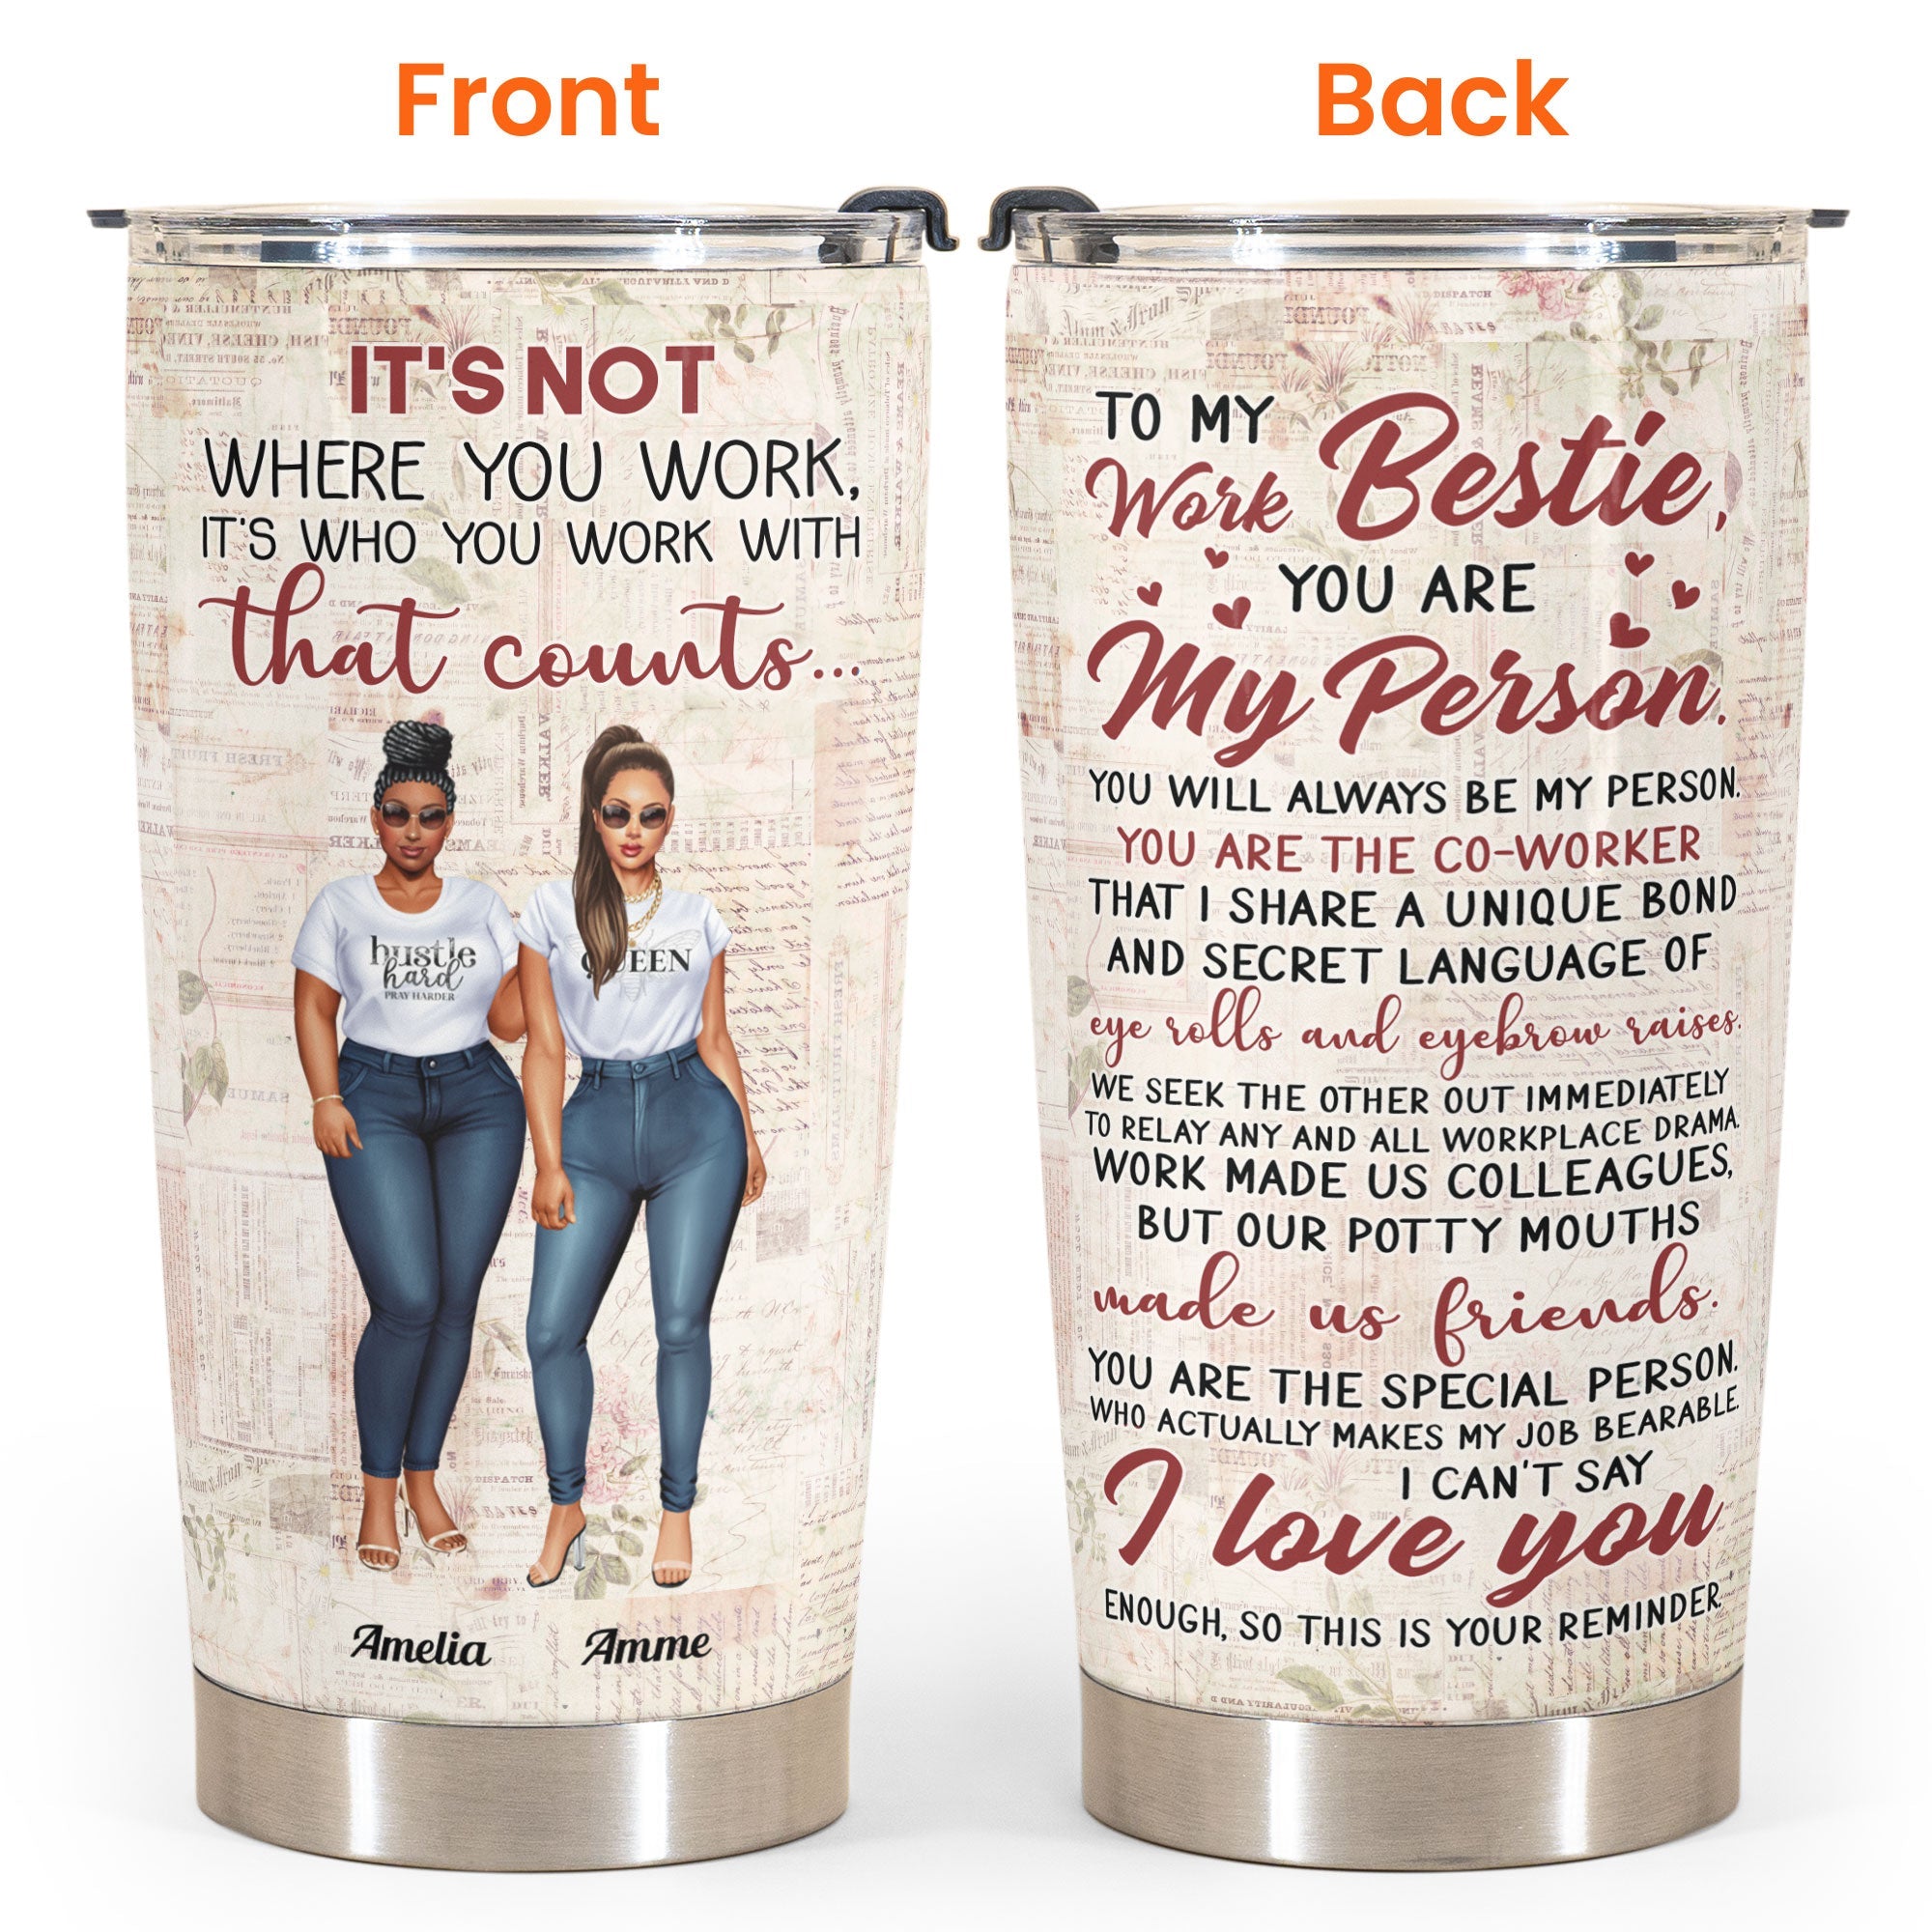 Top 10 Personalized Gifts - Make Your Colleagues Feel Special